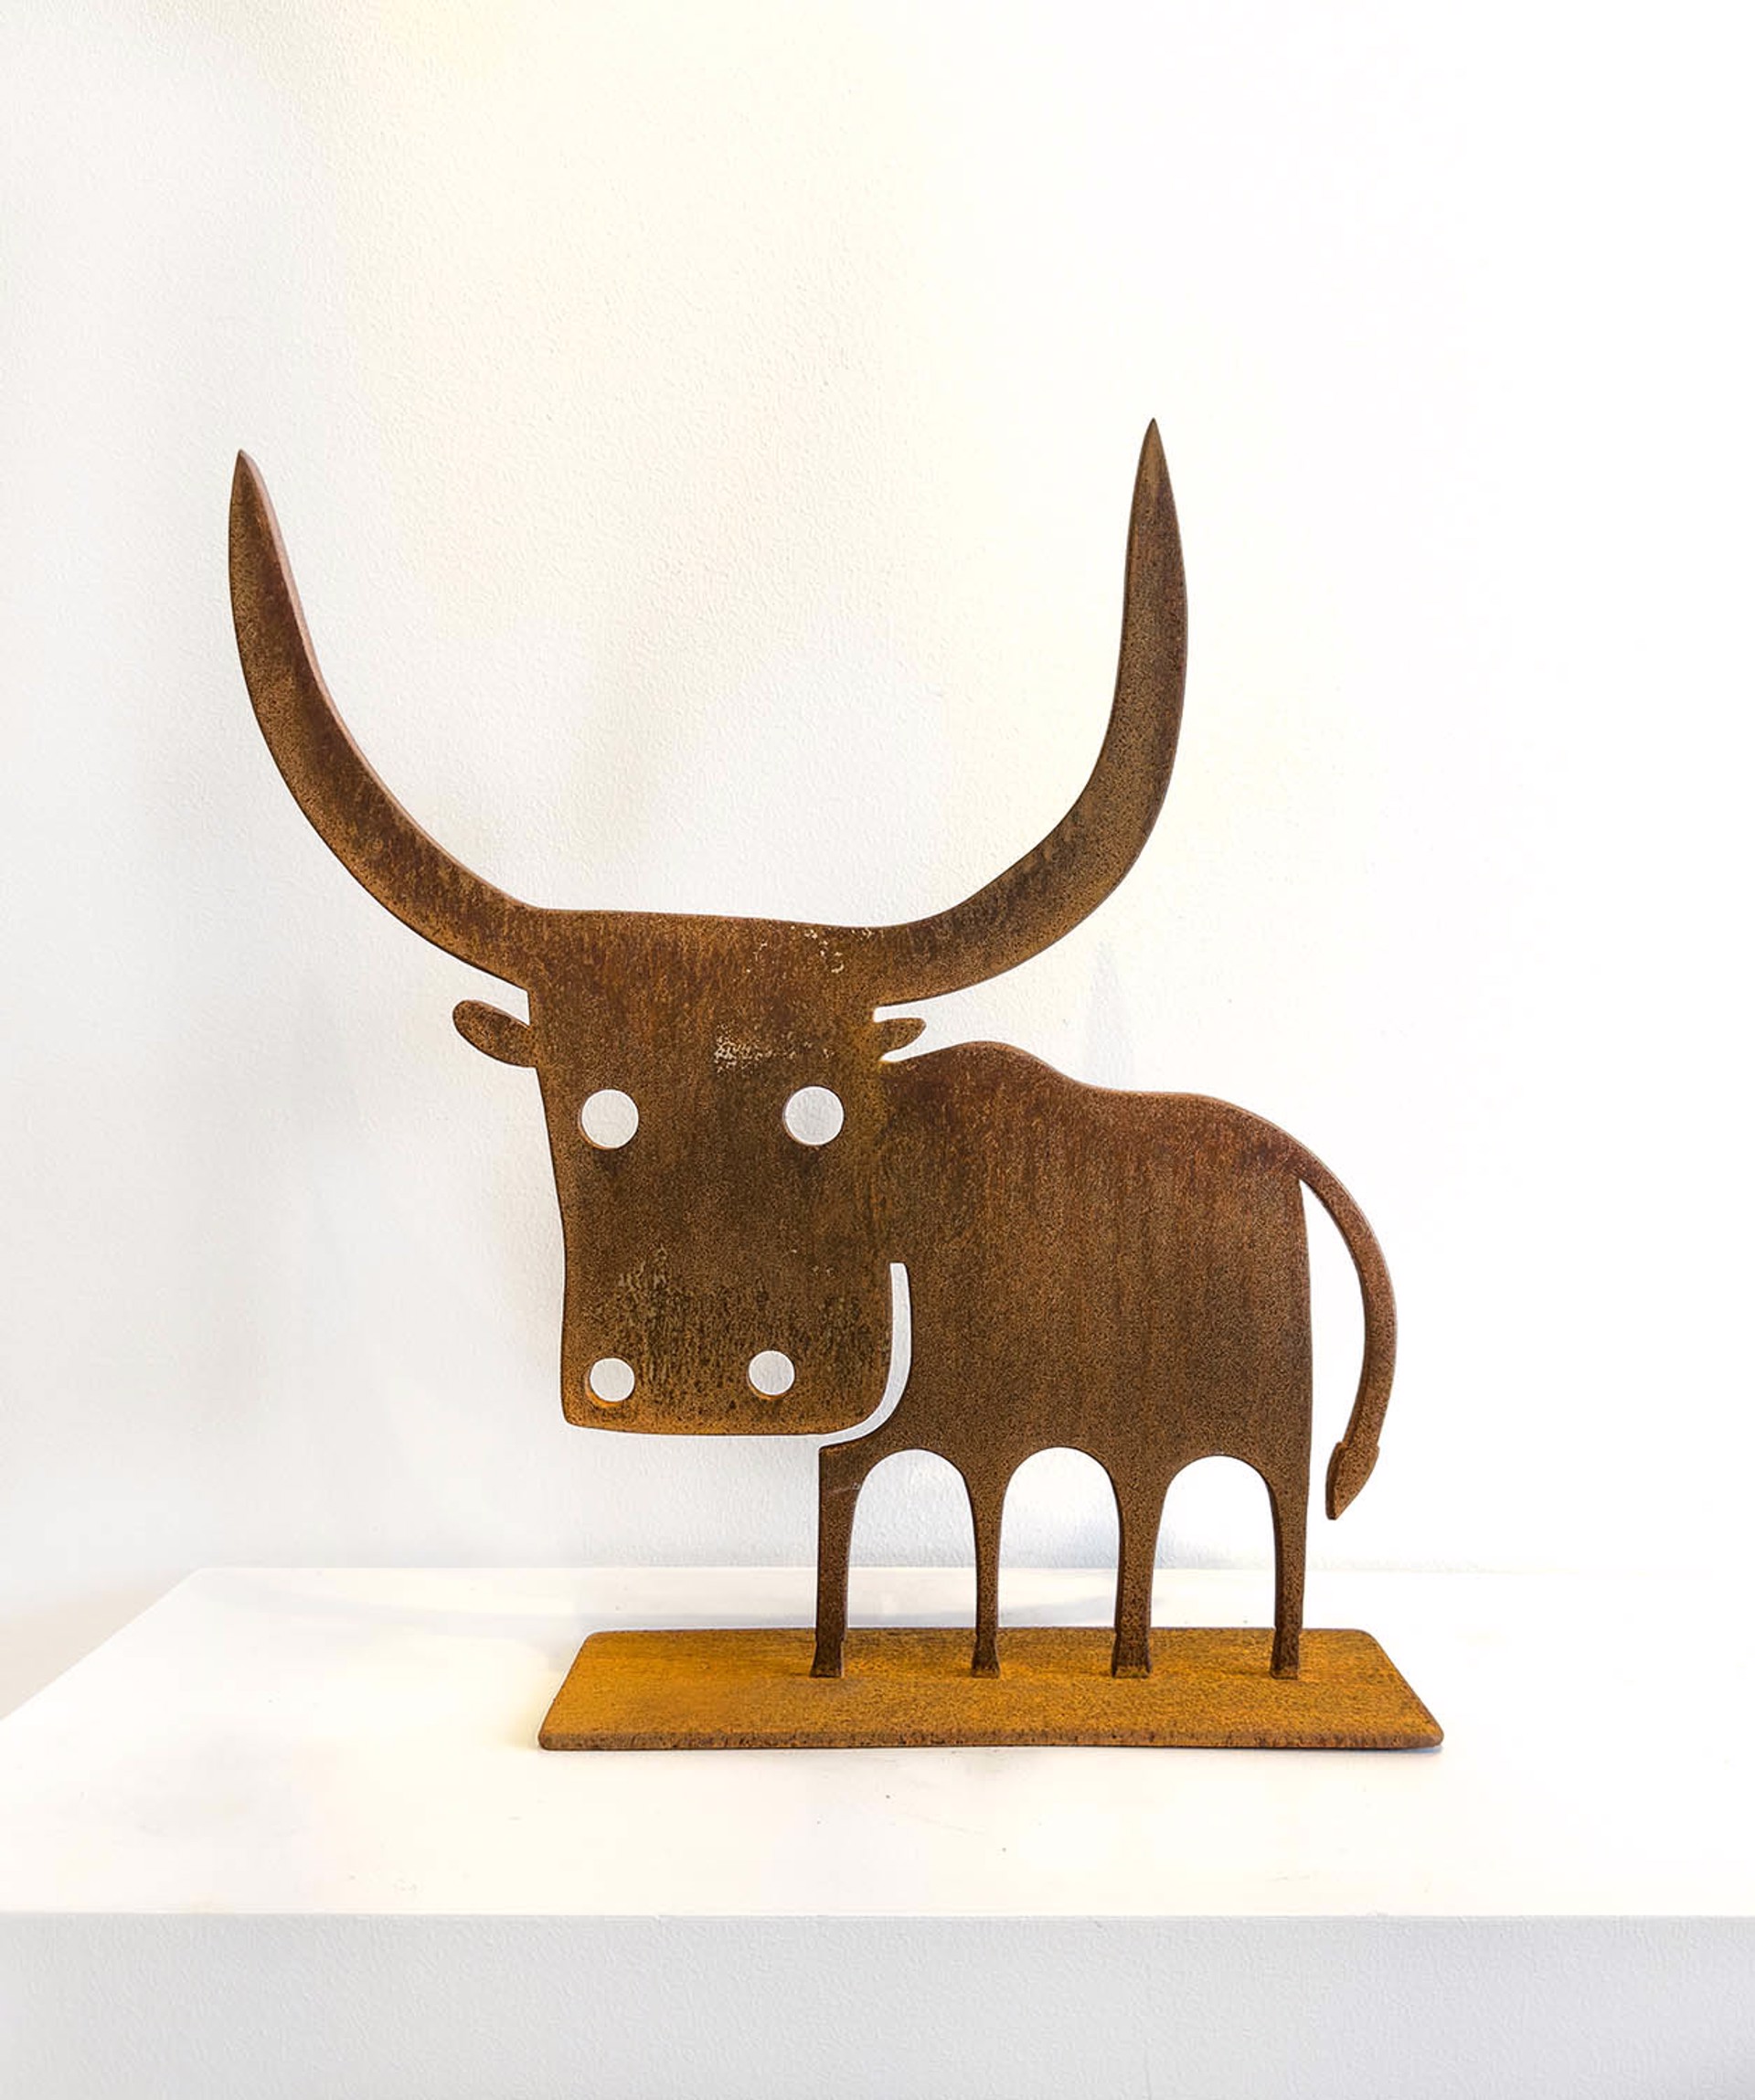 Steel Sculpture By Jeffie Brewer Of A Standing Bull With Rusty Finish